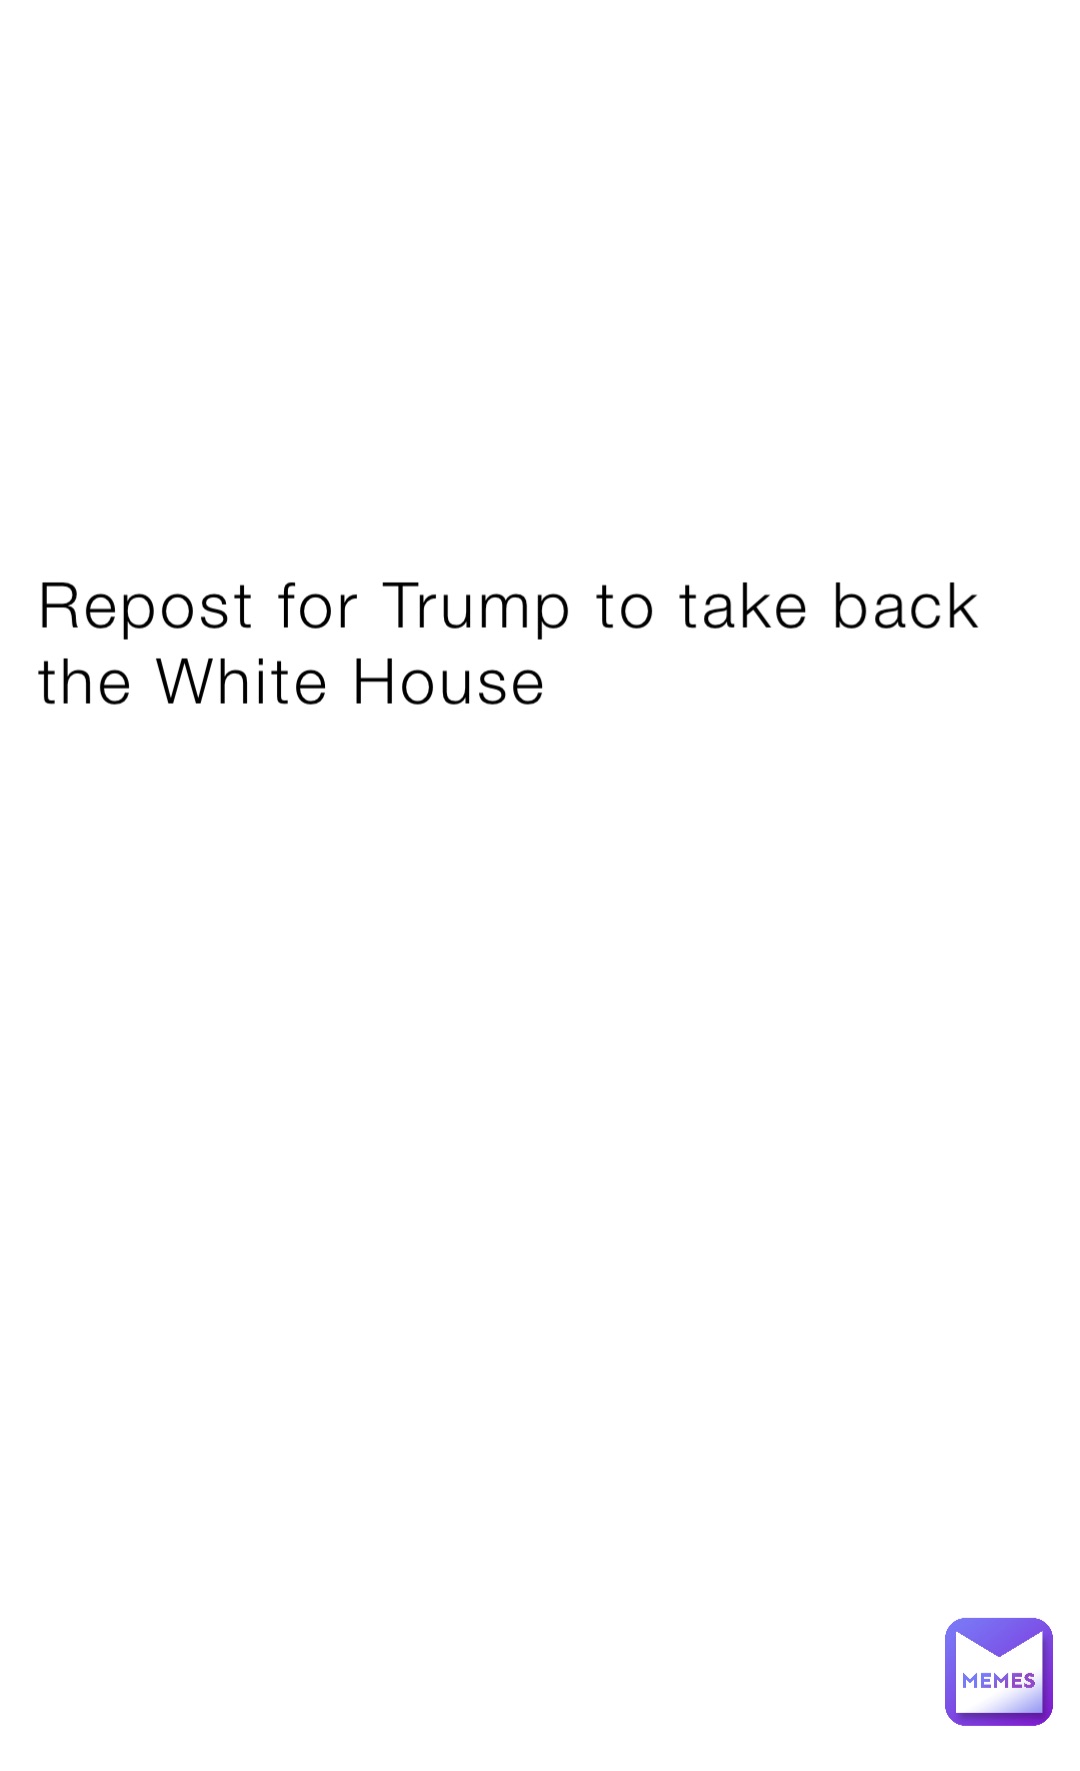 Repost for Trump to take back the White House